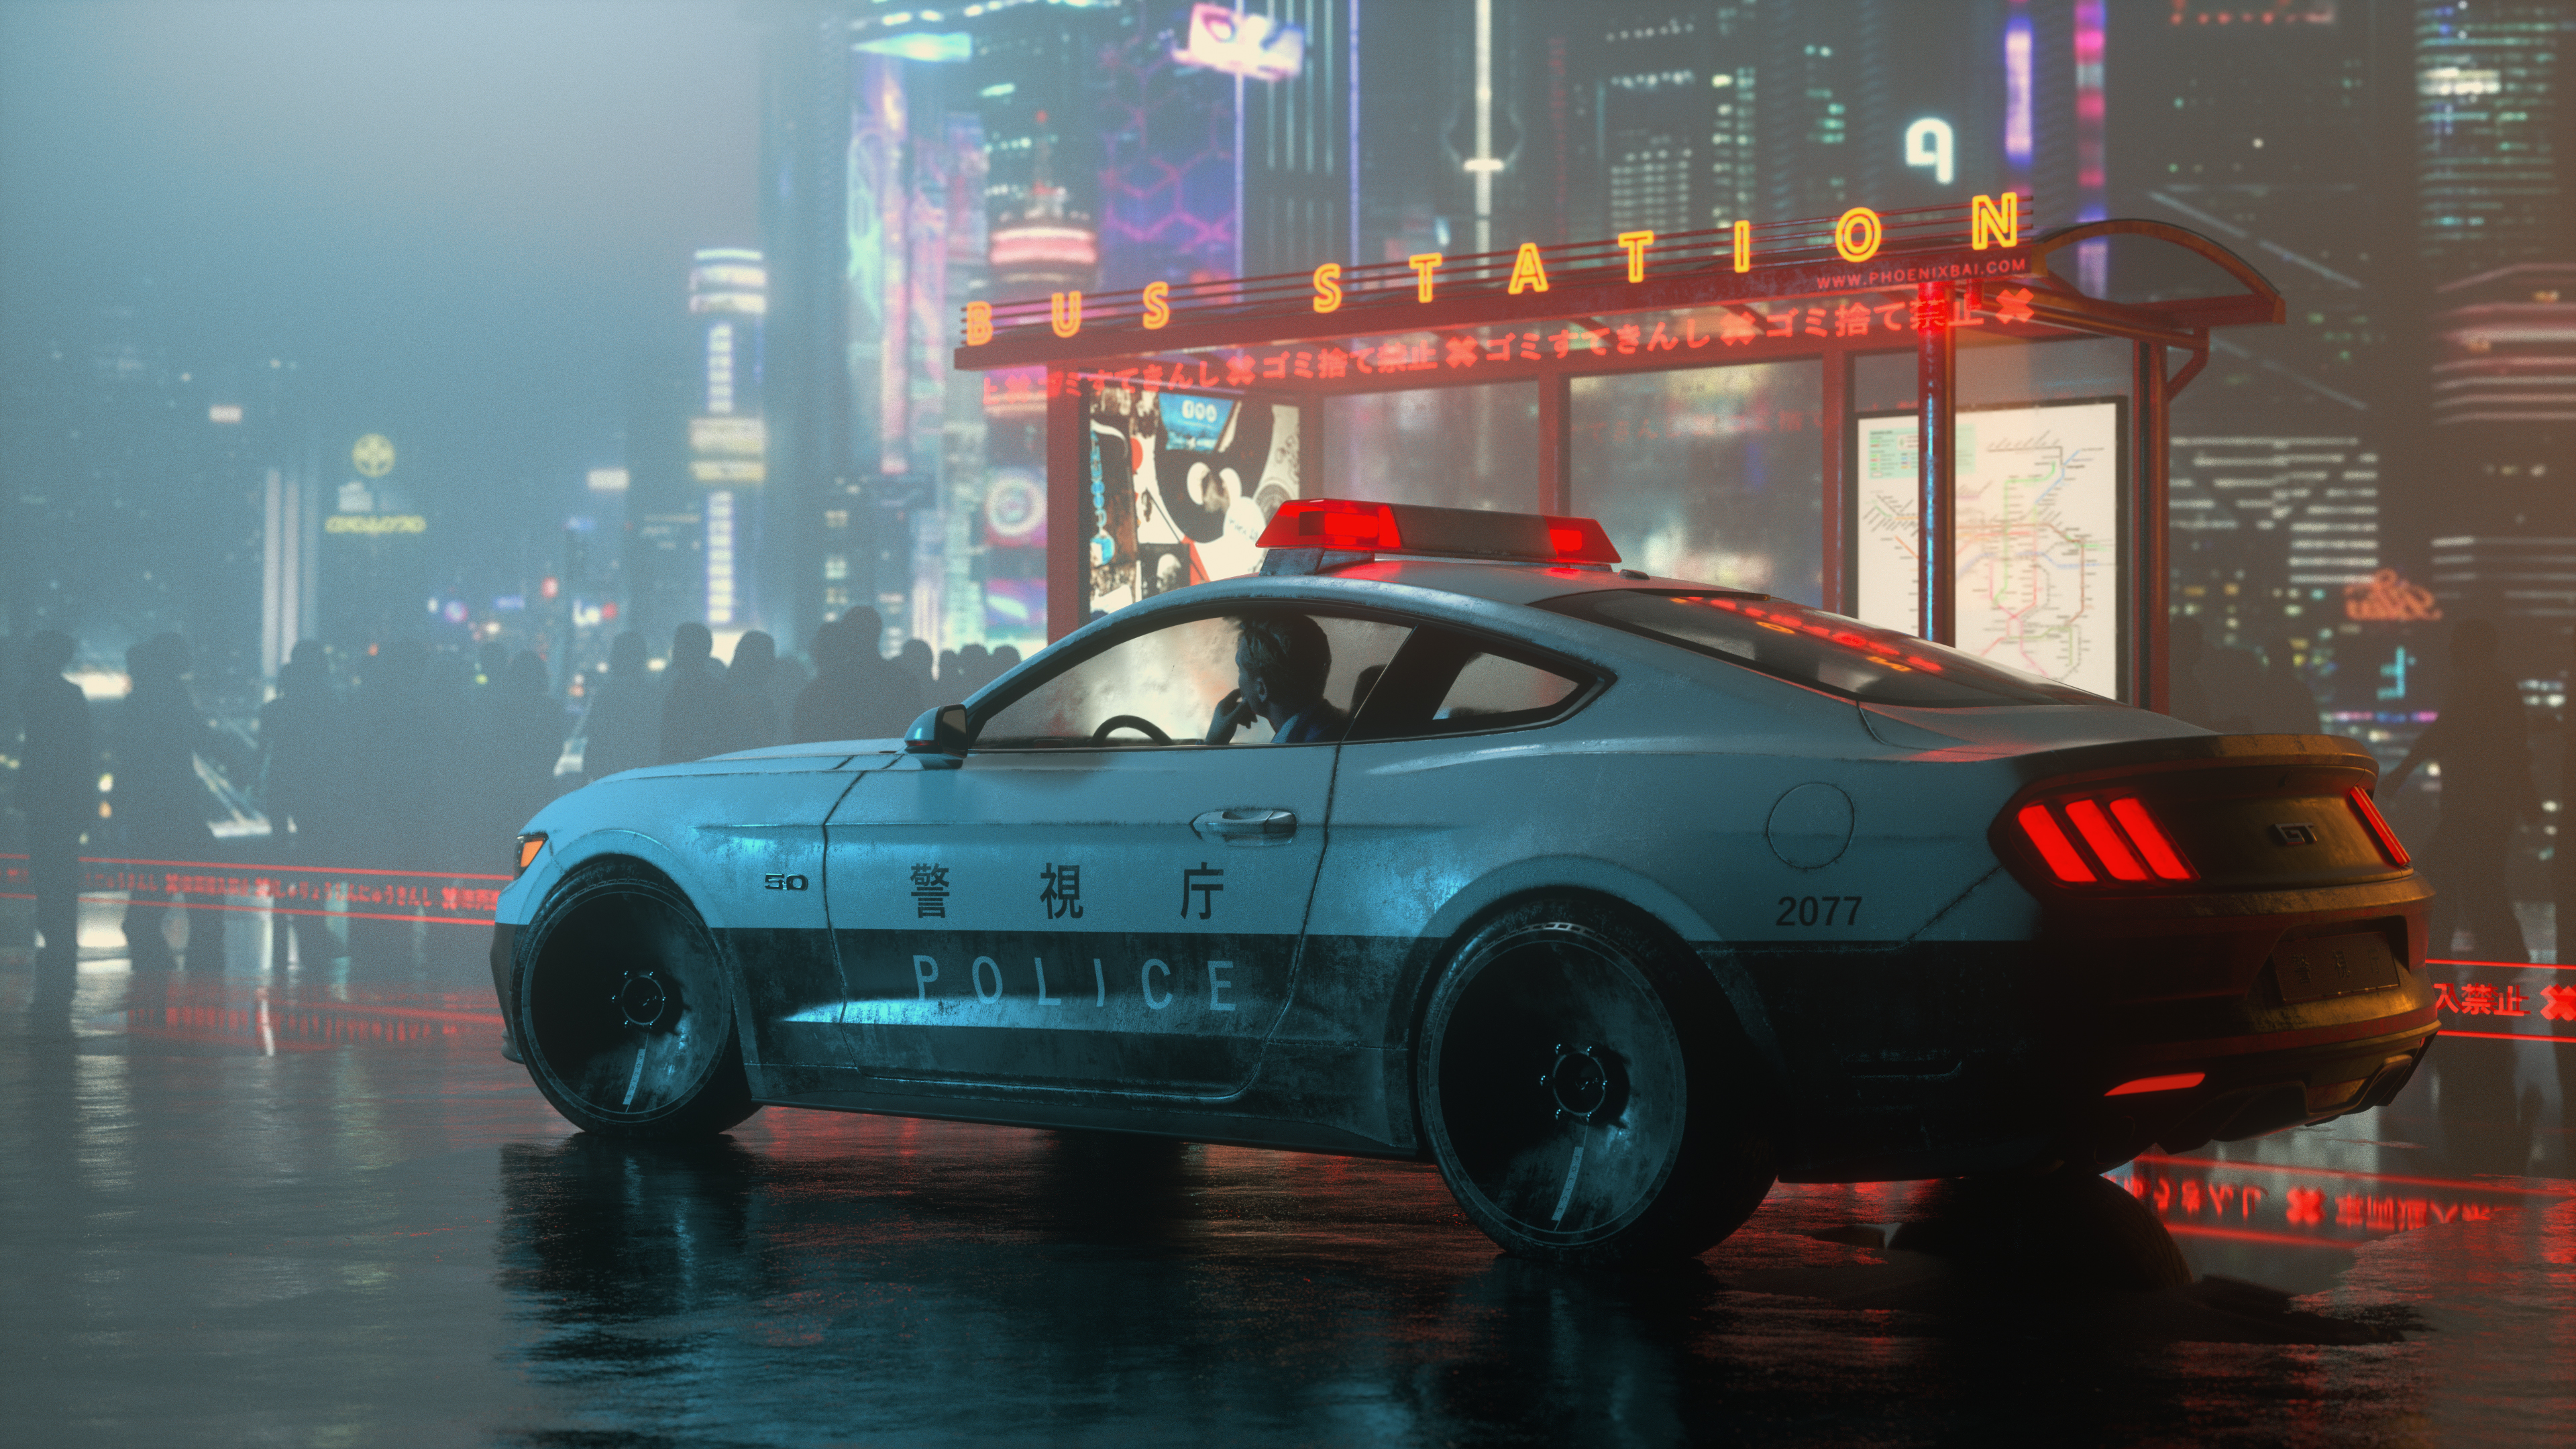 General 3840x2160 car artwork vehicle Asia science fiction night cityscape Ford Ford Mustang muscle cars American cars